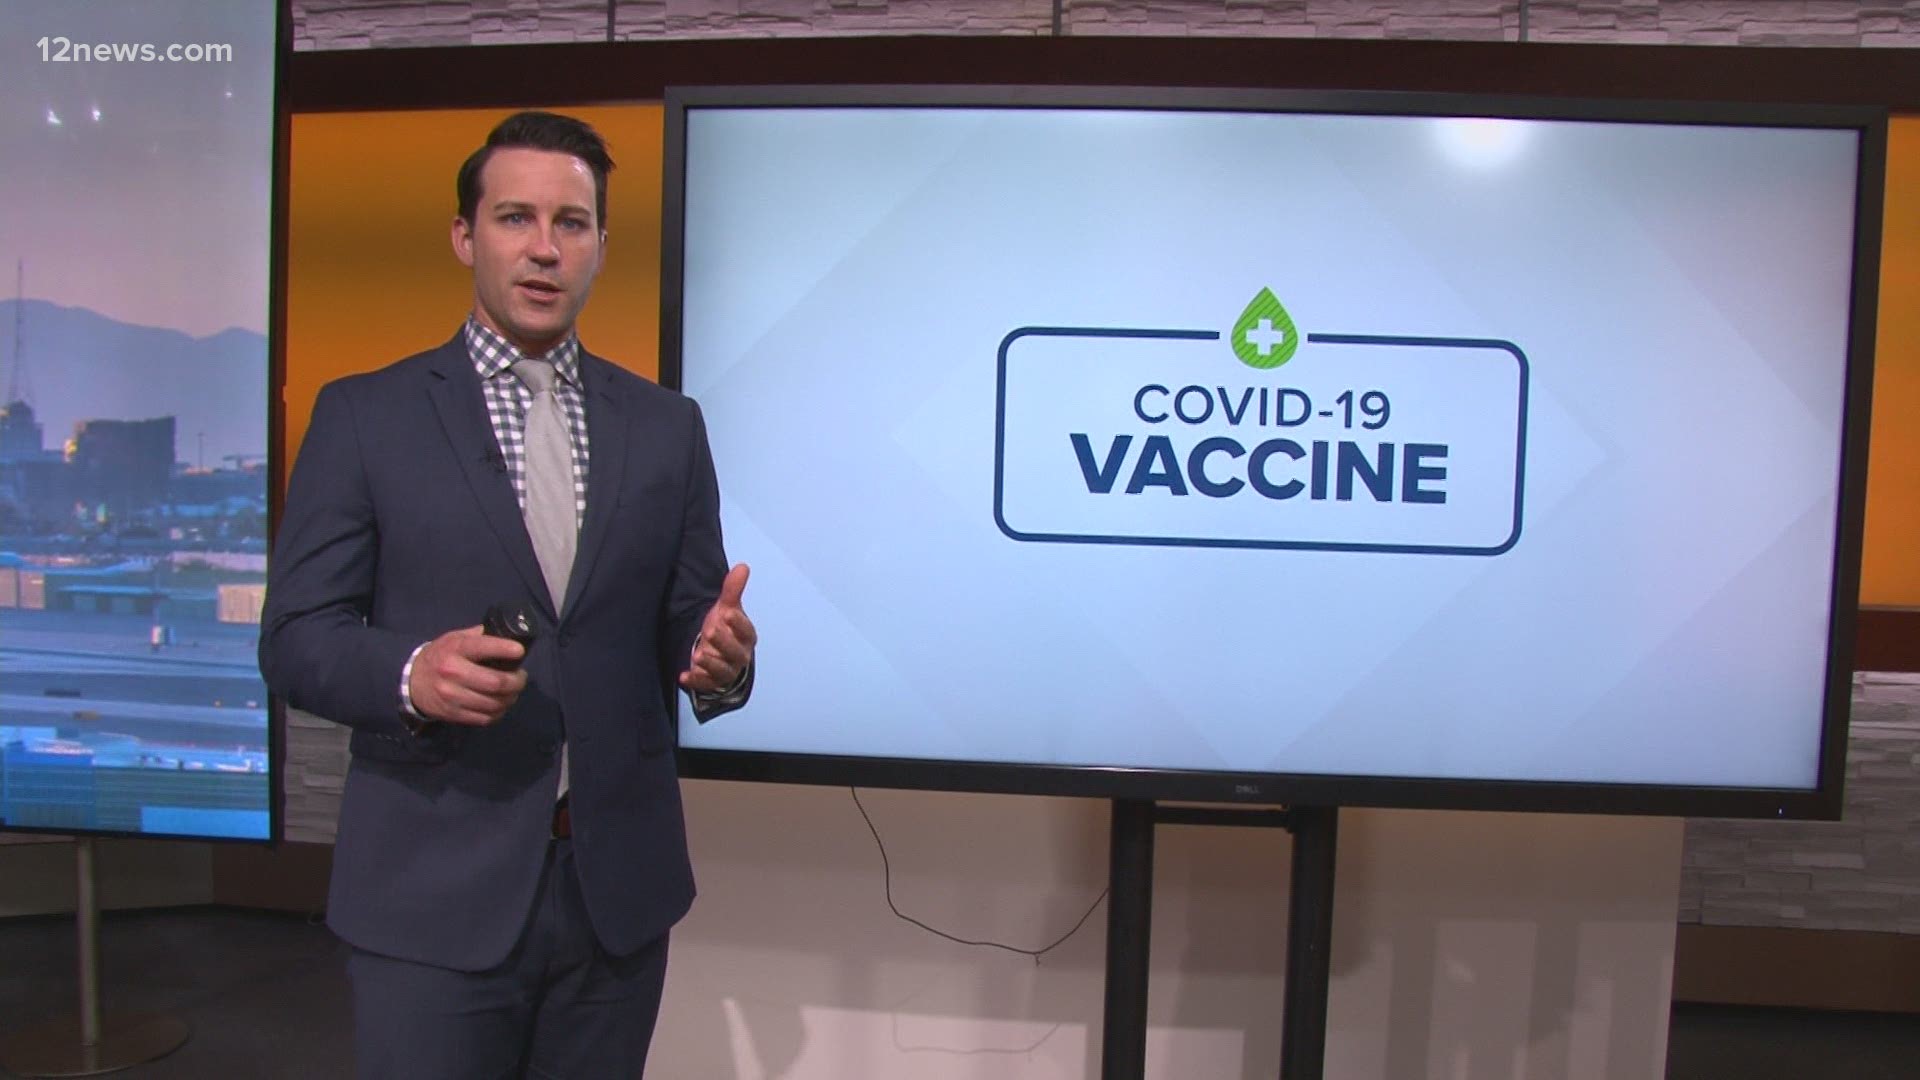 What are the differences between the COVID-19 vaccines? Ryan Cody has the details.